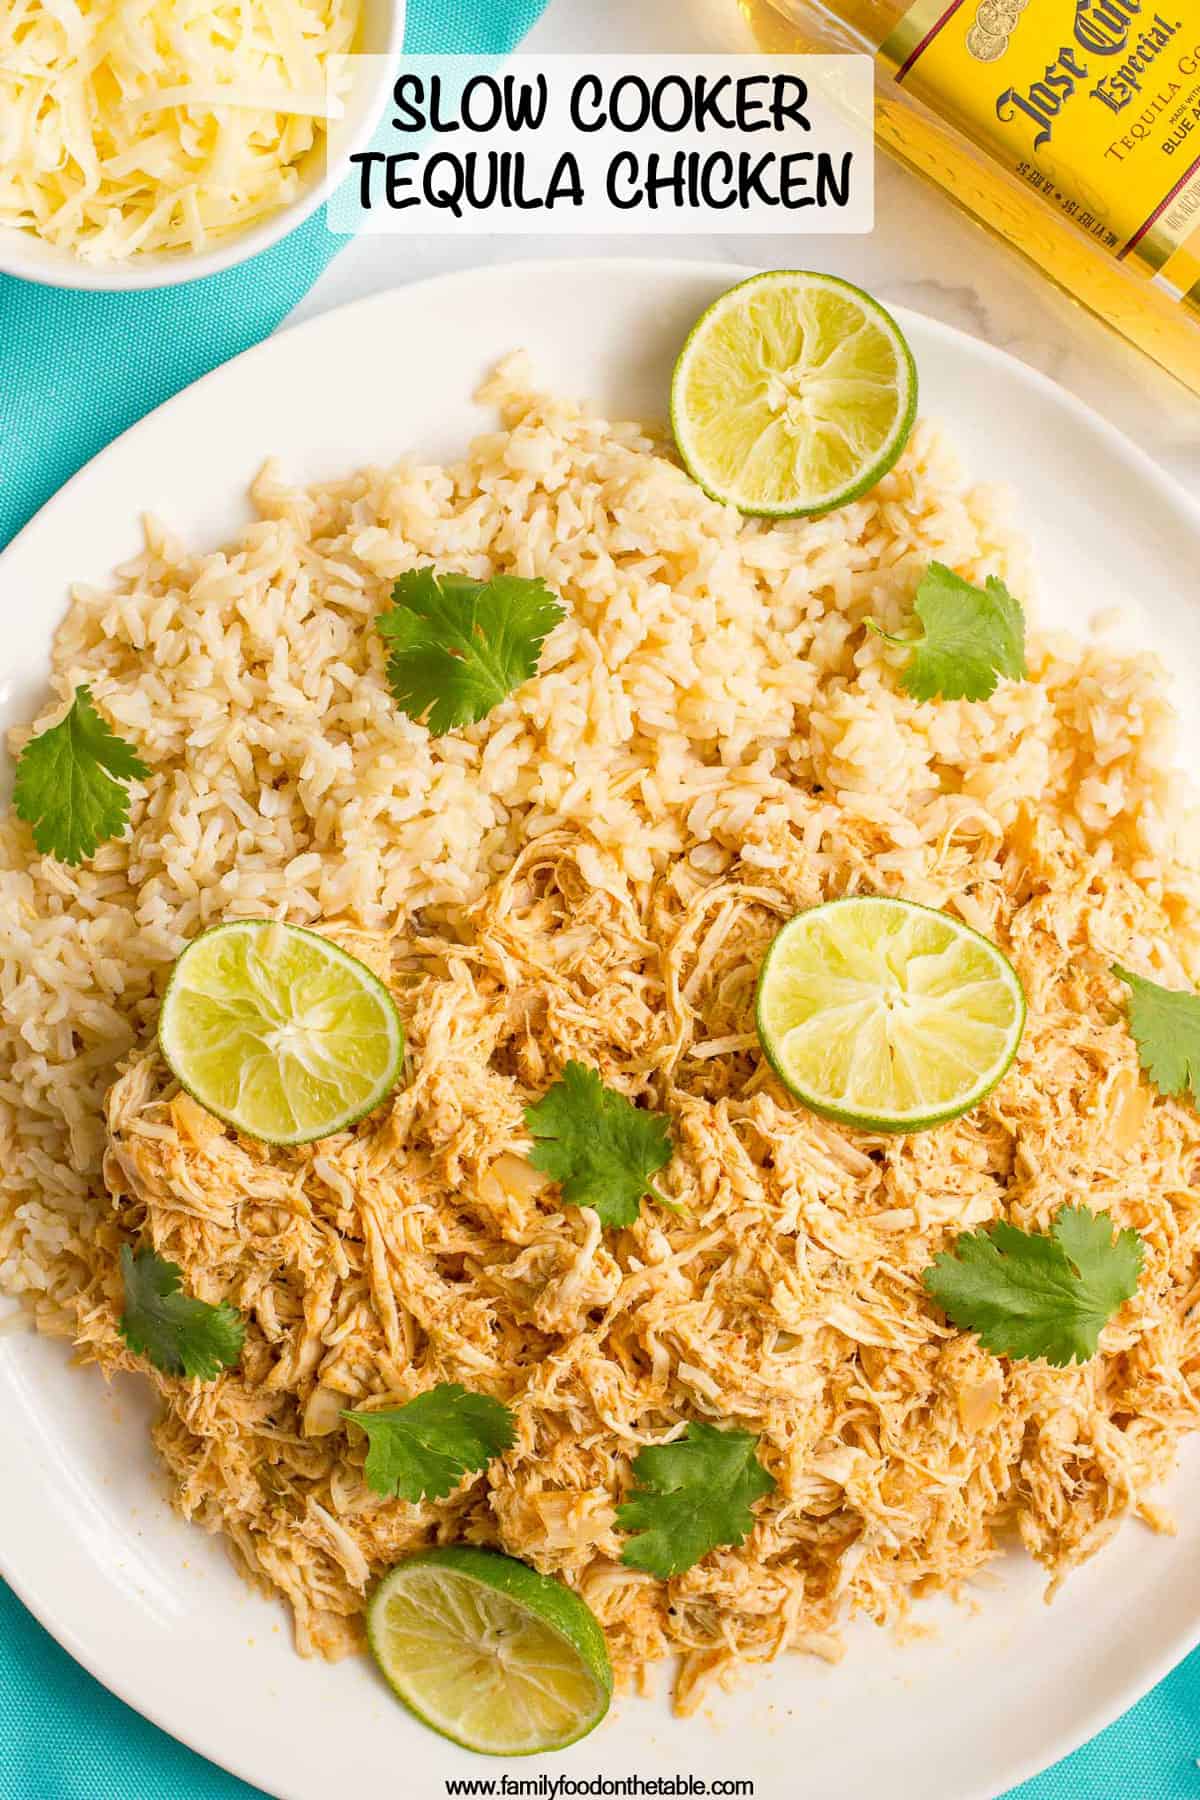 A serving plate loaded with steamed brown rice and shredded tequila chicken topped with cilantro and lime slices.